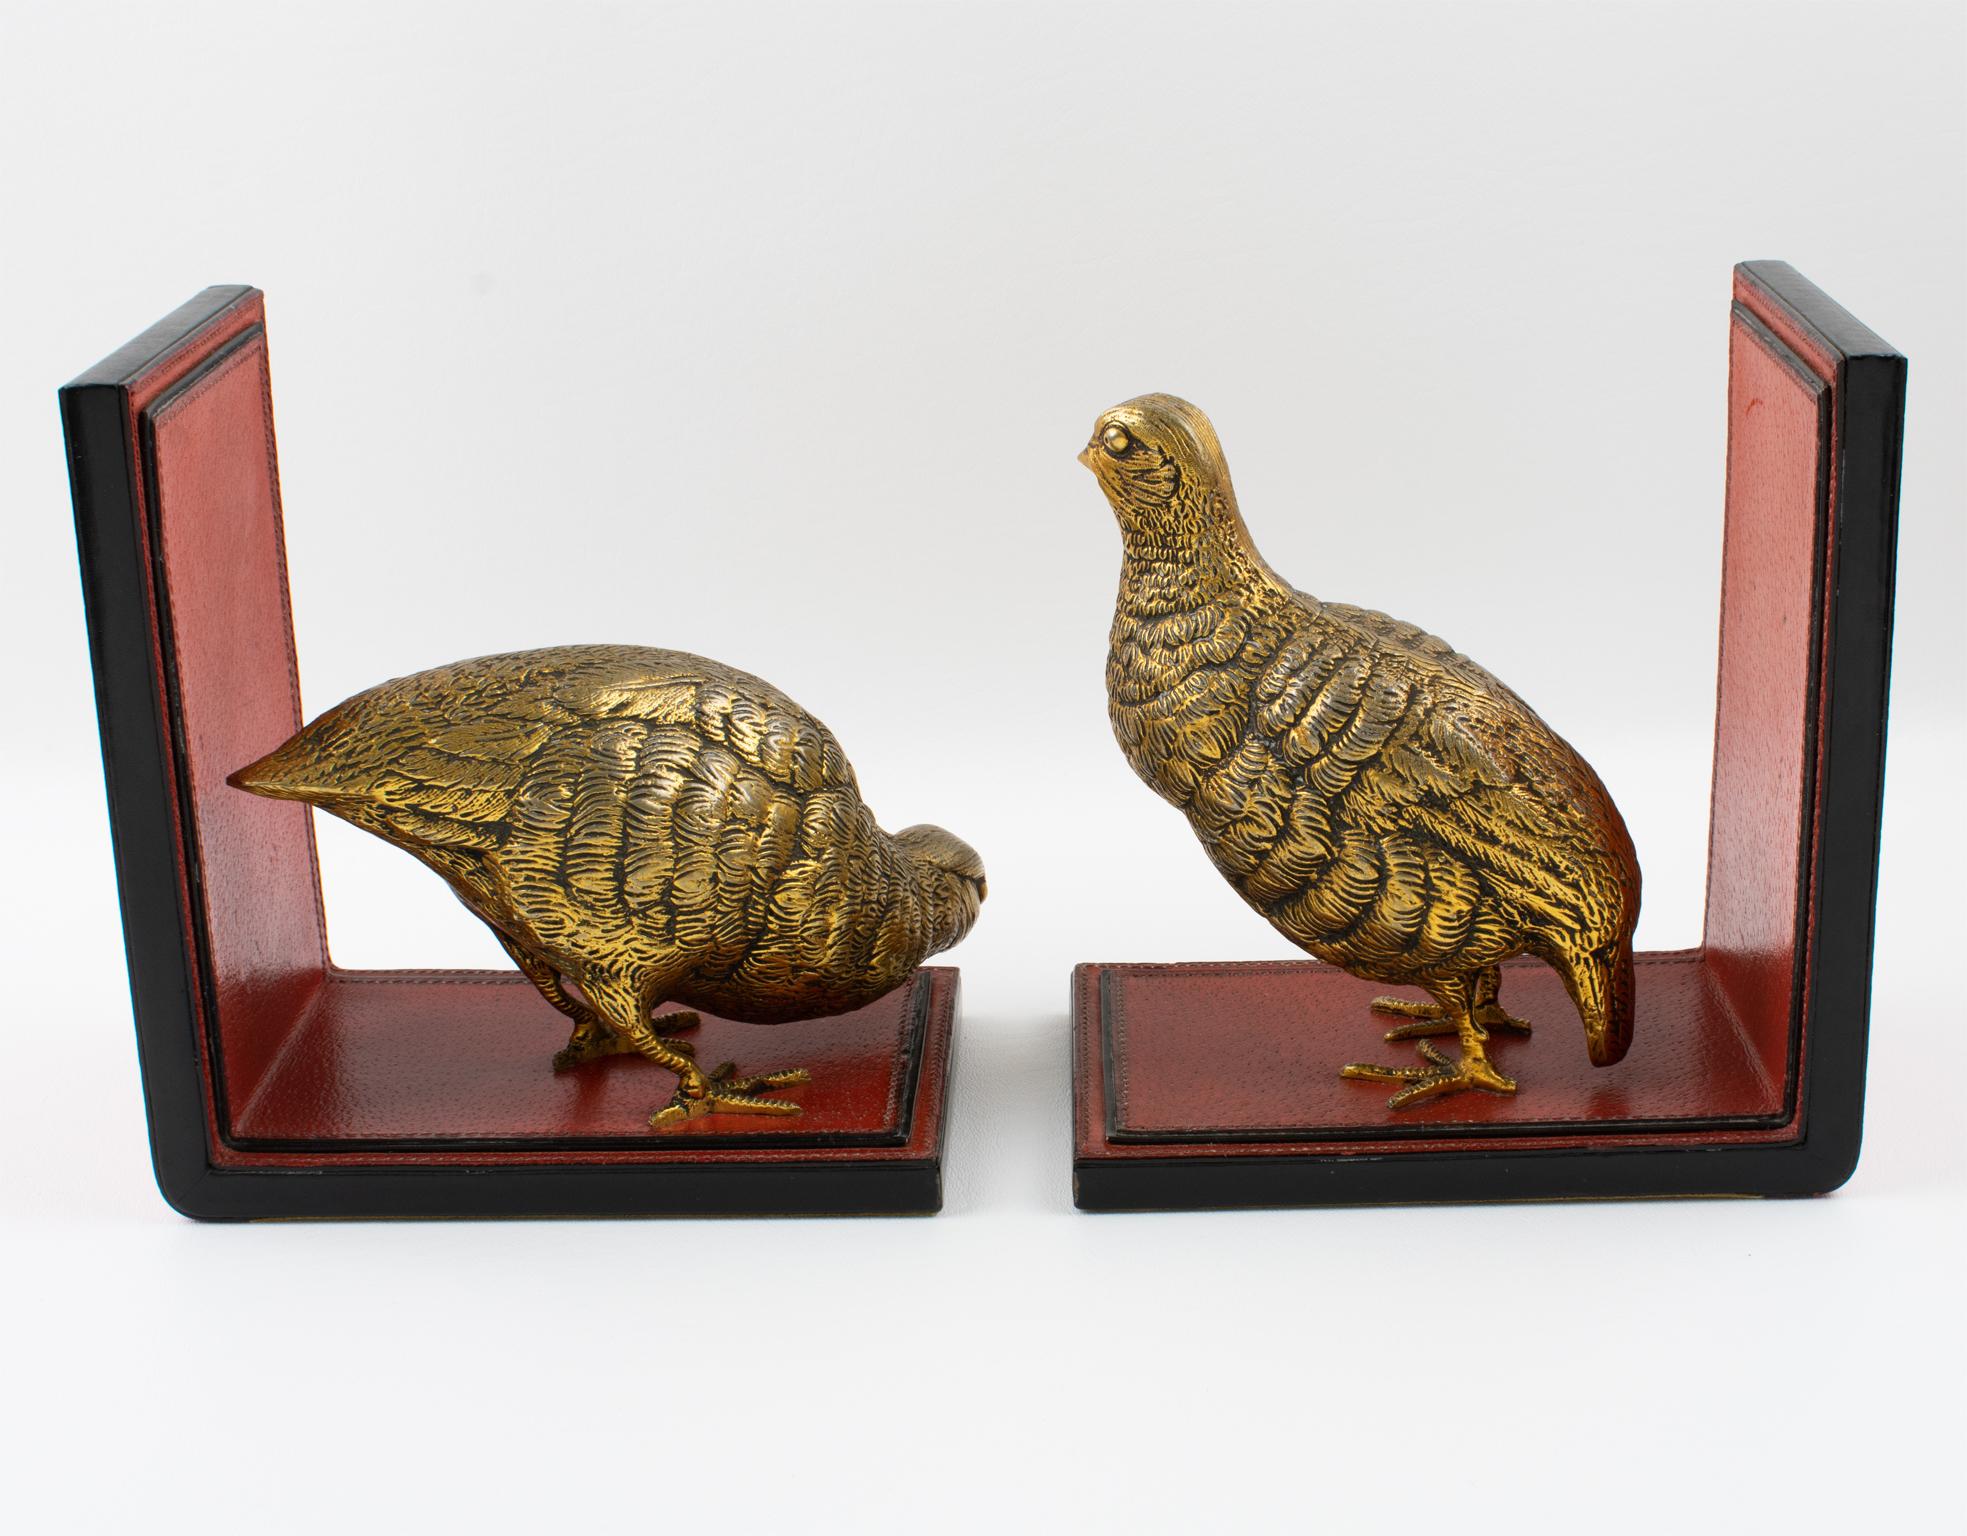 Late 20th Century Gucci Italy Hand-Stitched Red Leather Bookends with Gilt Metal Partridges, 1970s